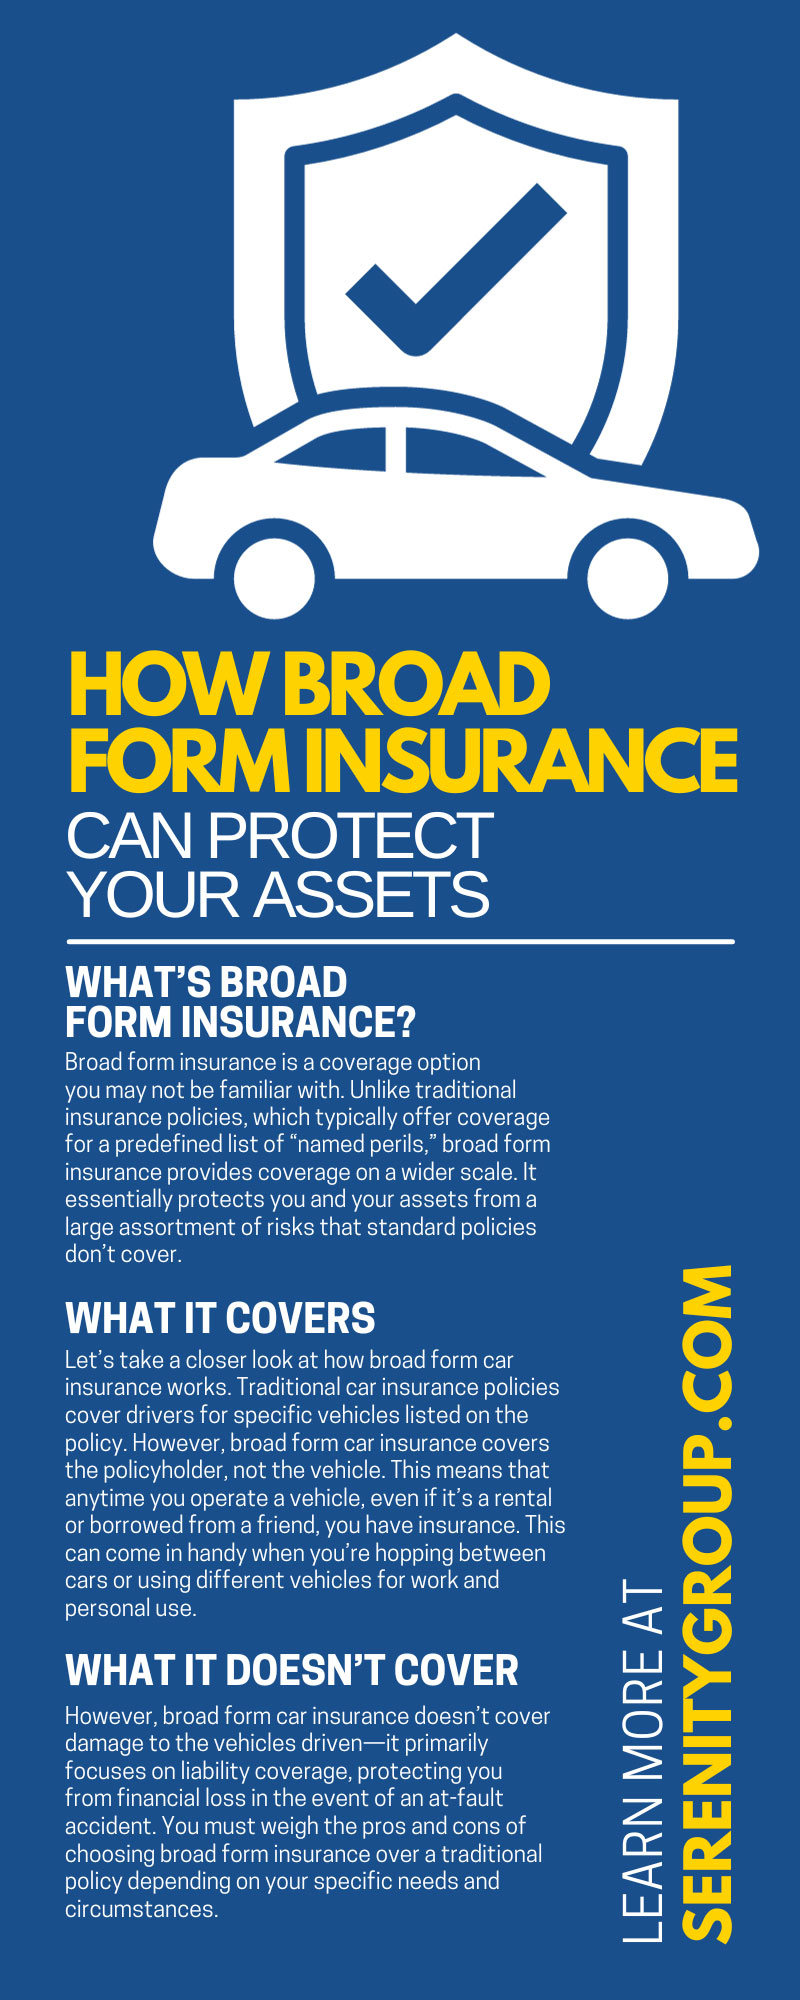 How Broad Form Insurance Can Protect Your Assets